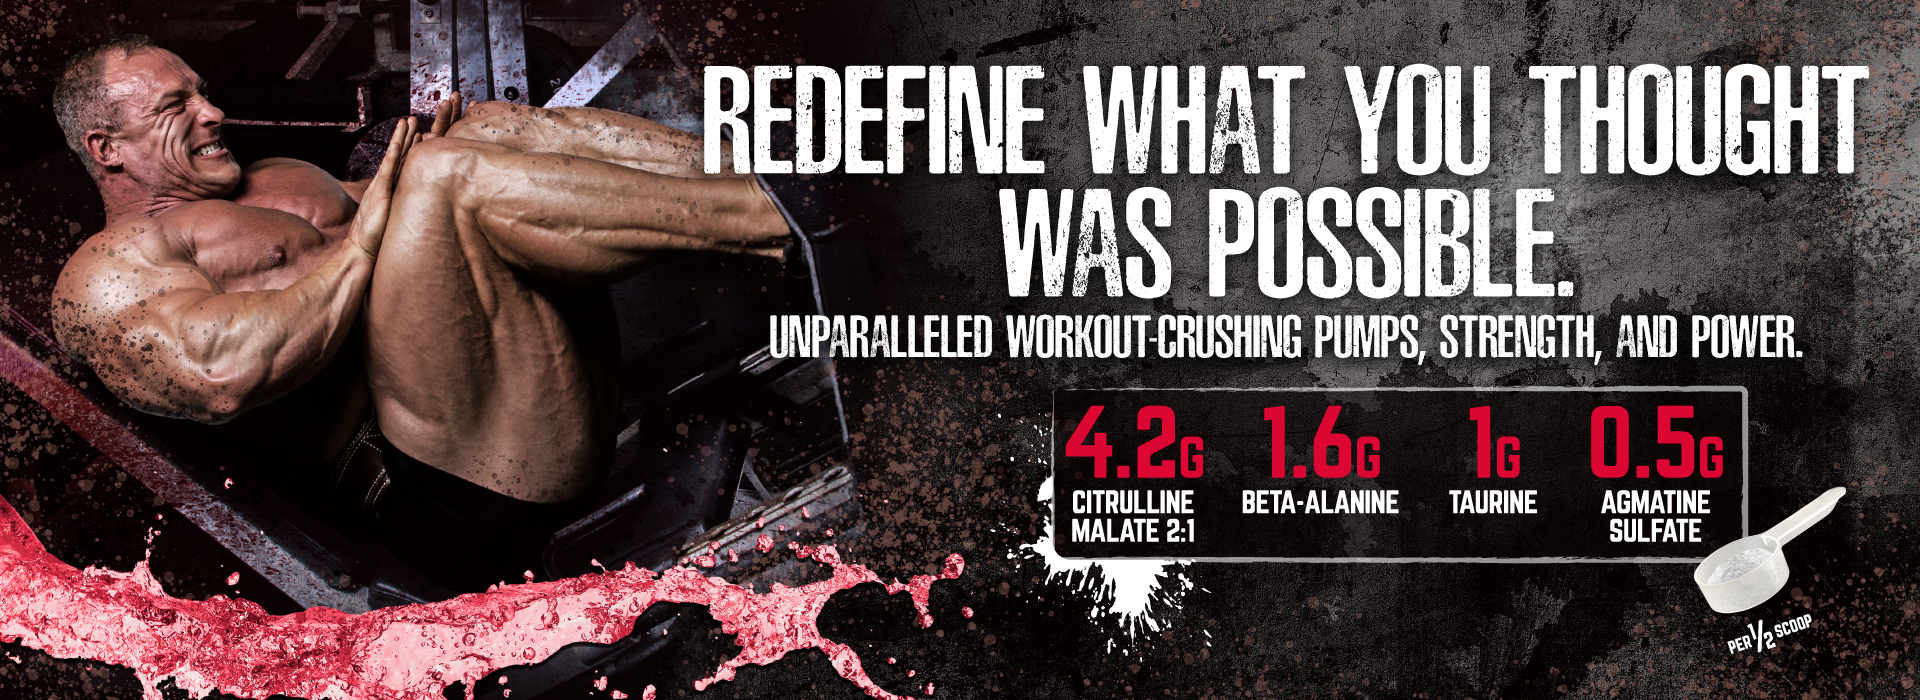 ALTRD State Extreme Pre Workout by PERFECT Sports. The Strongest Pre Workout!